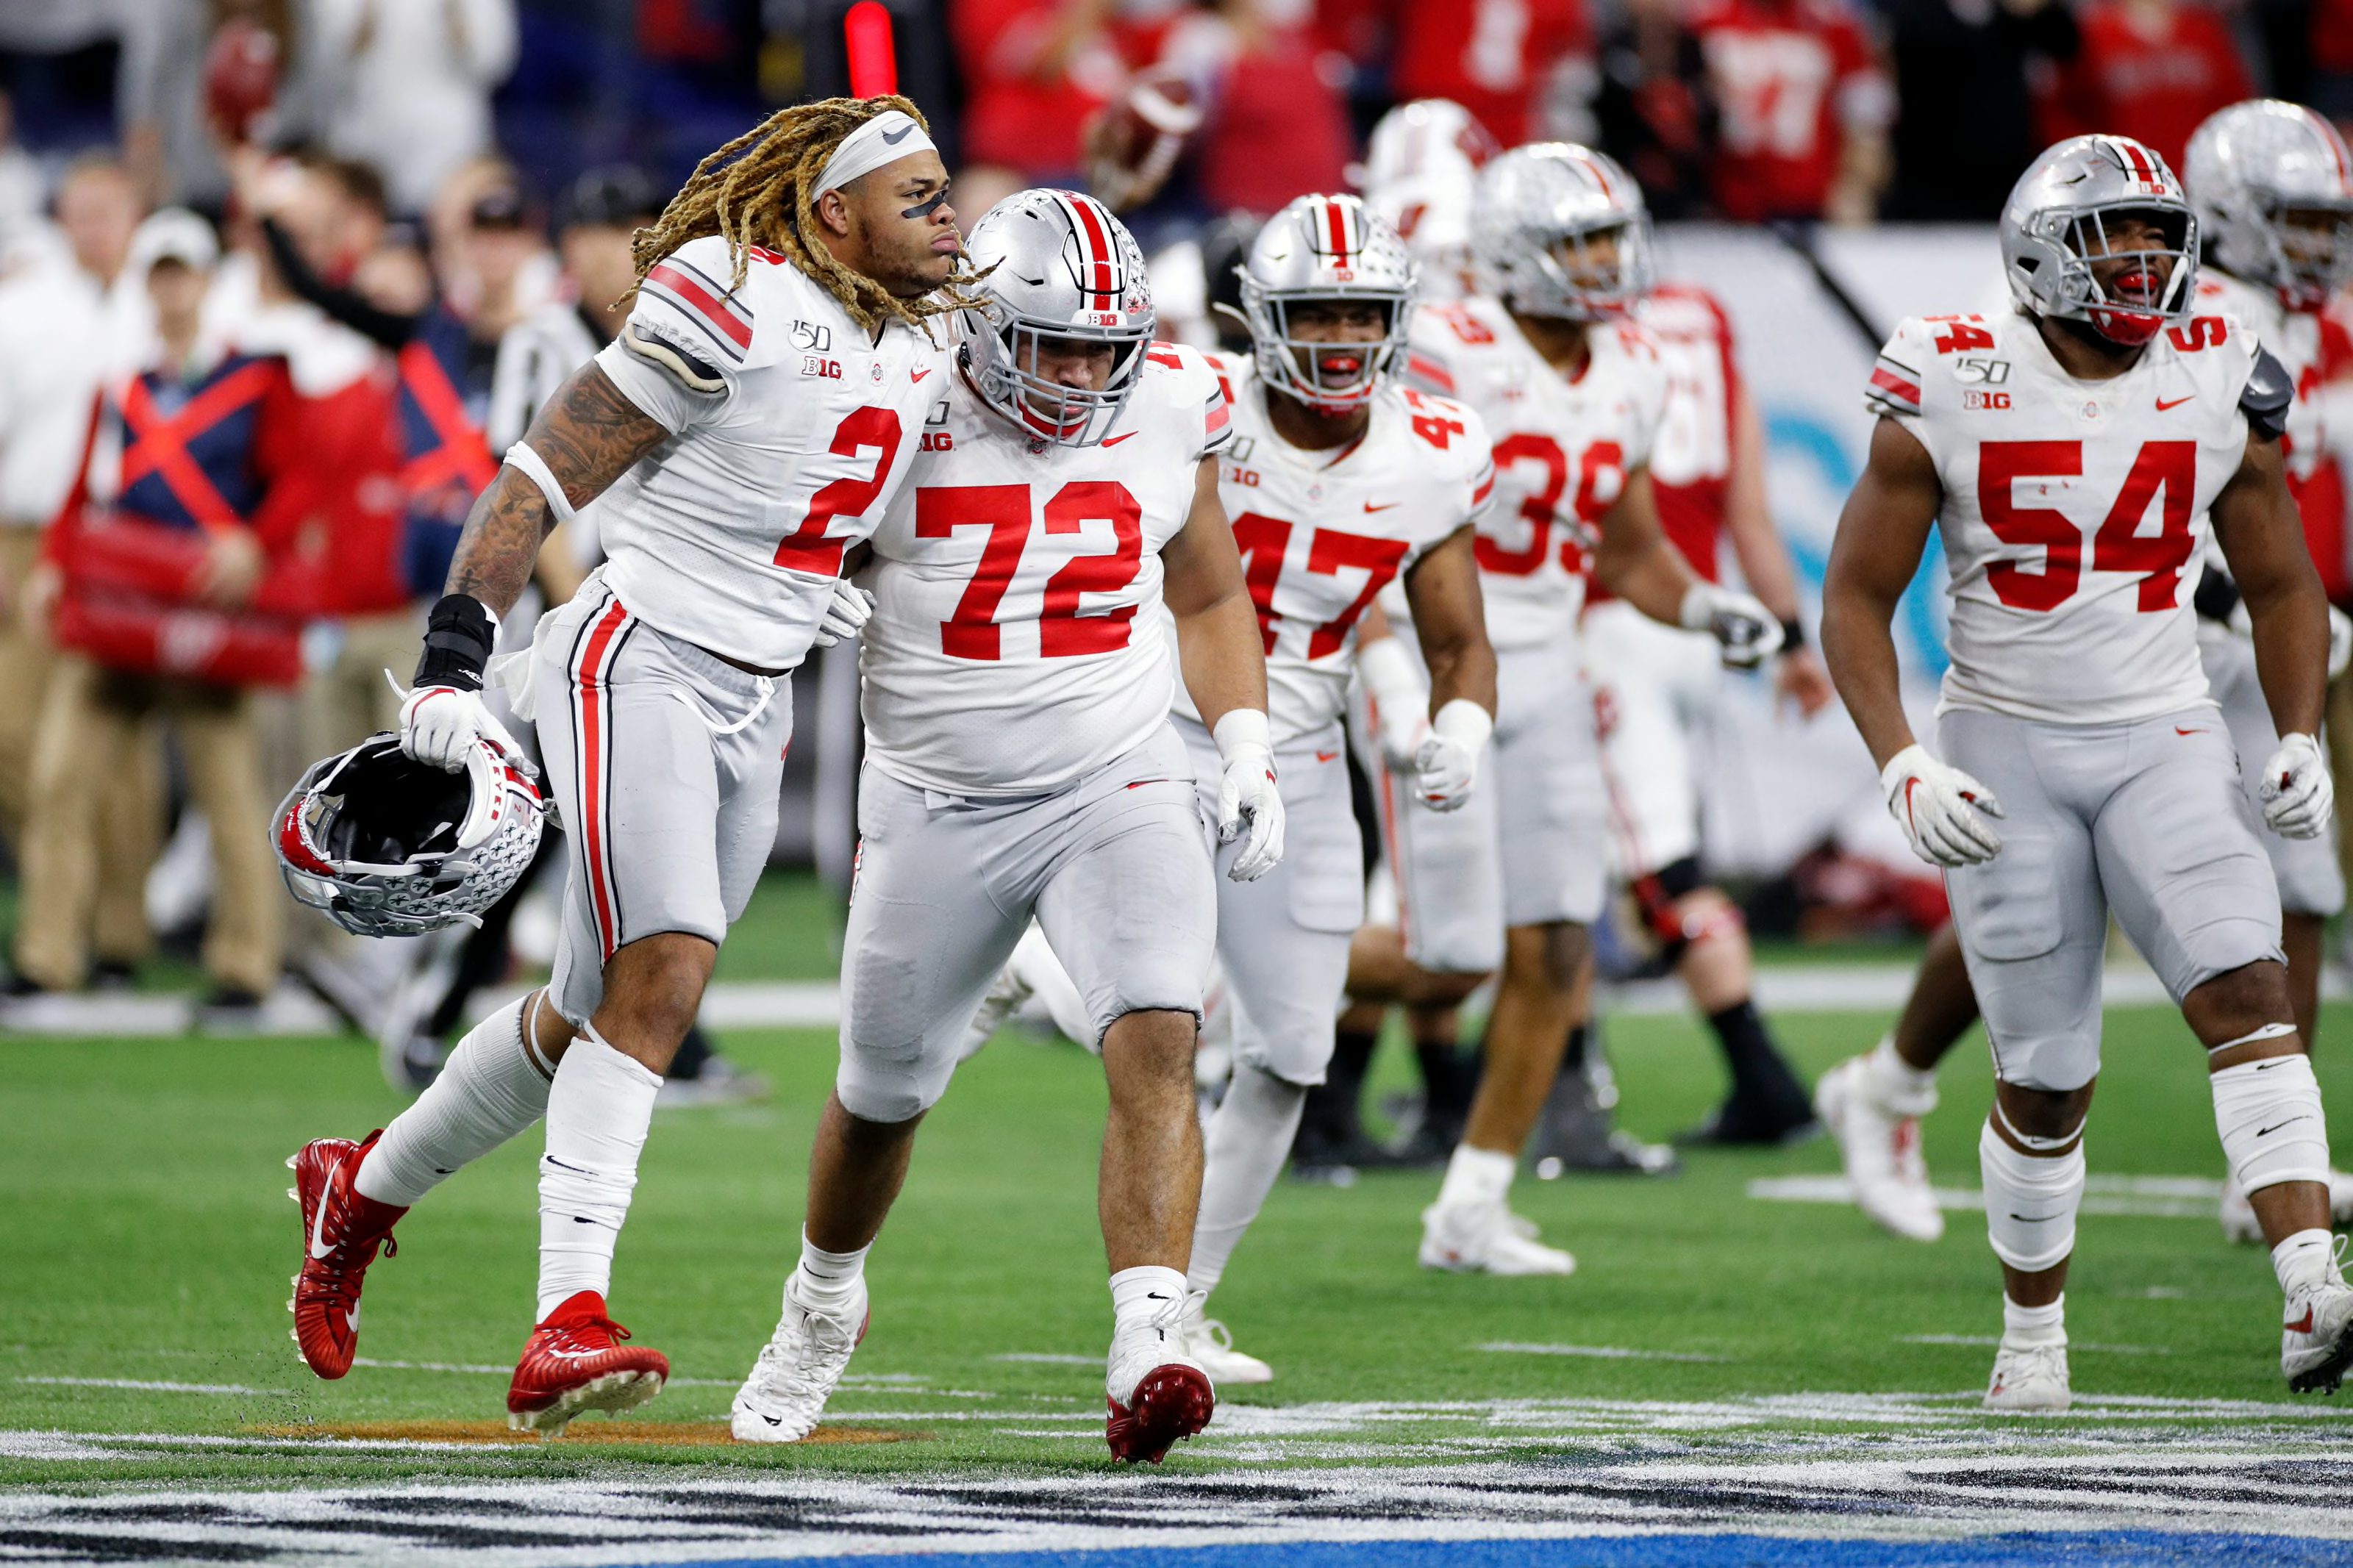 Ohio State Football The state of Big Ten football, ranking the programs